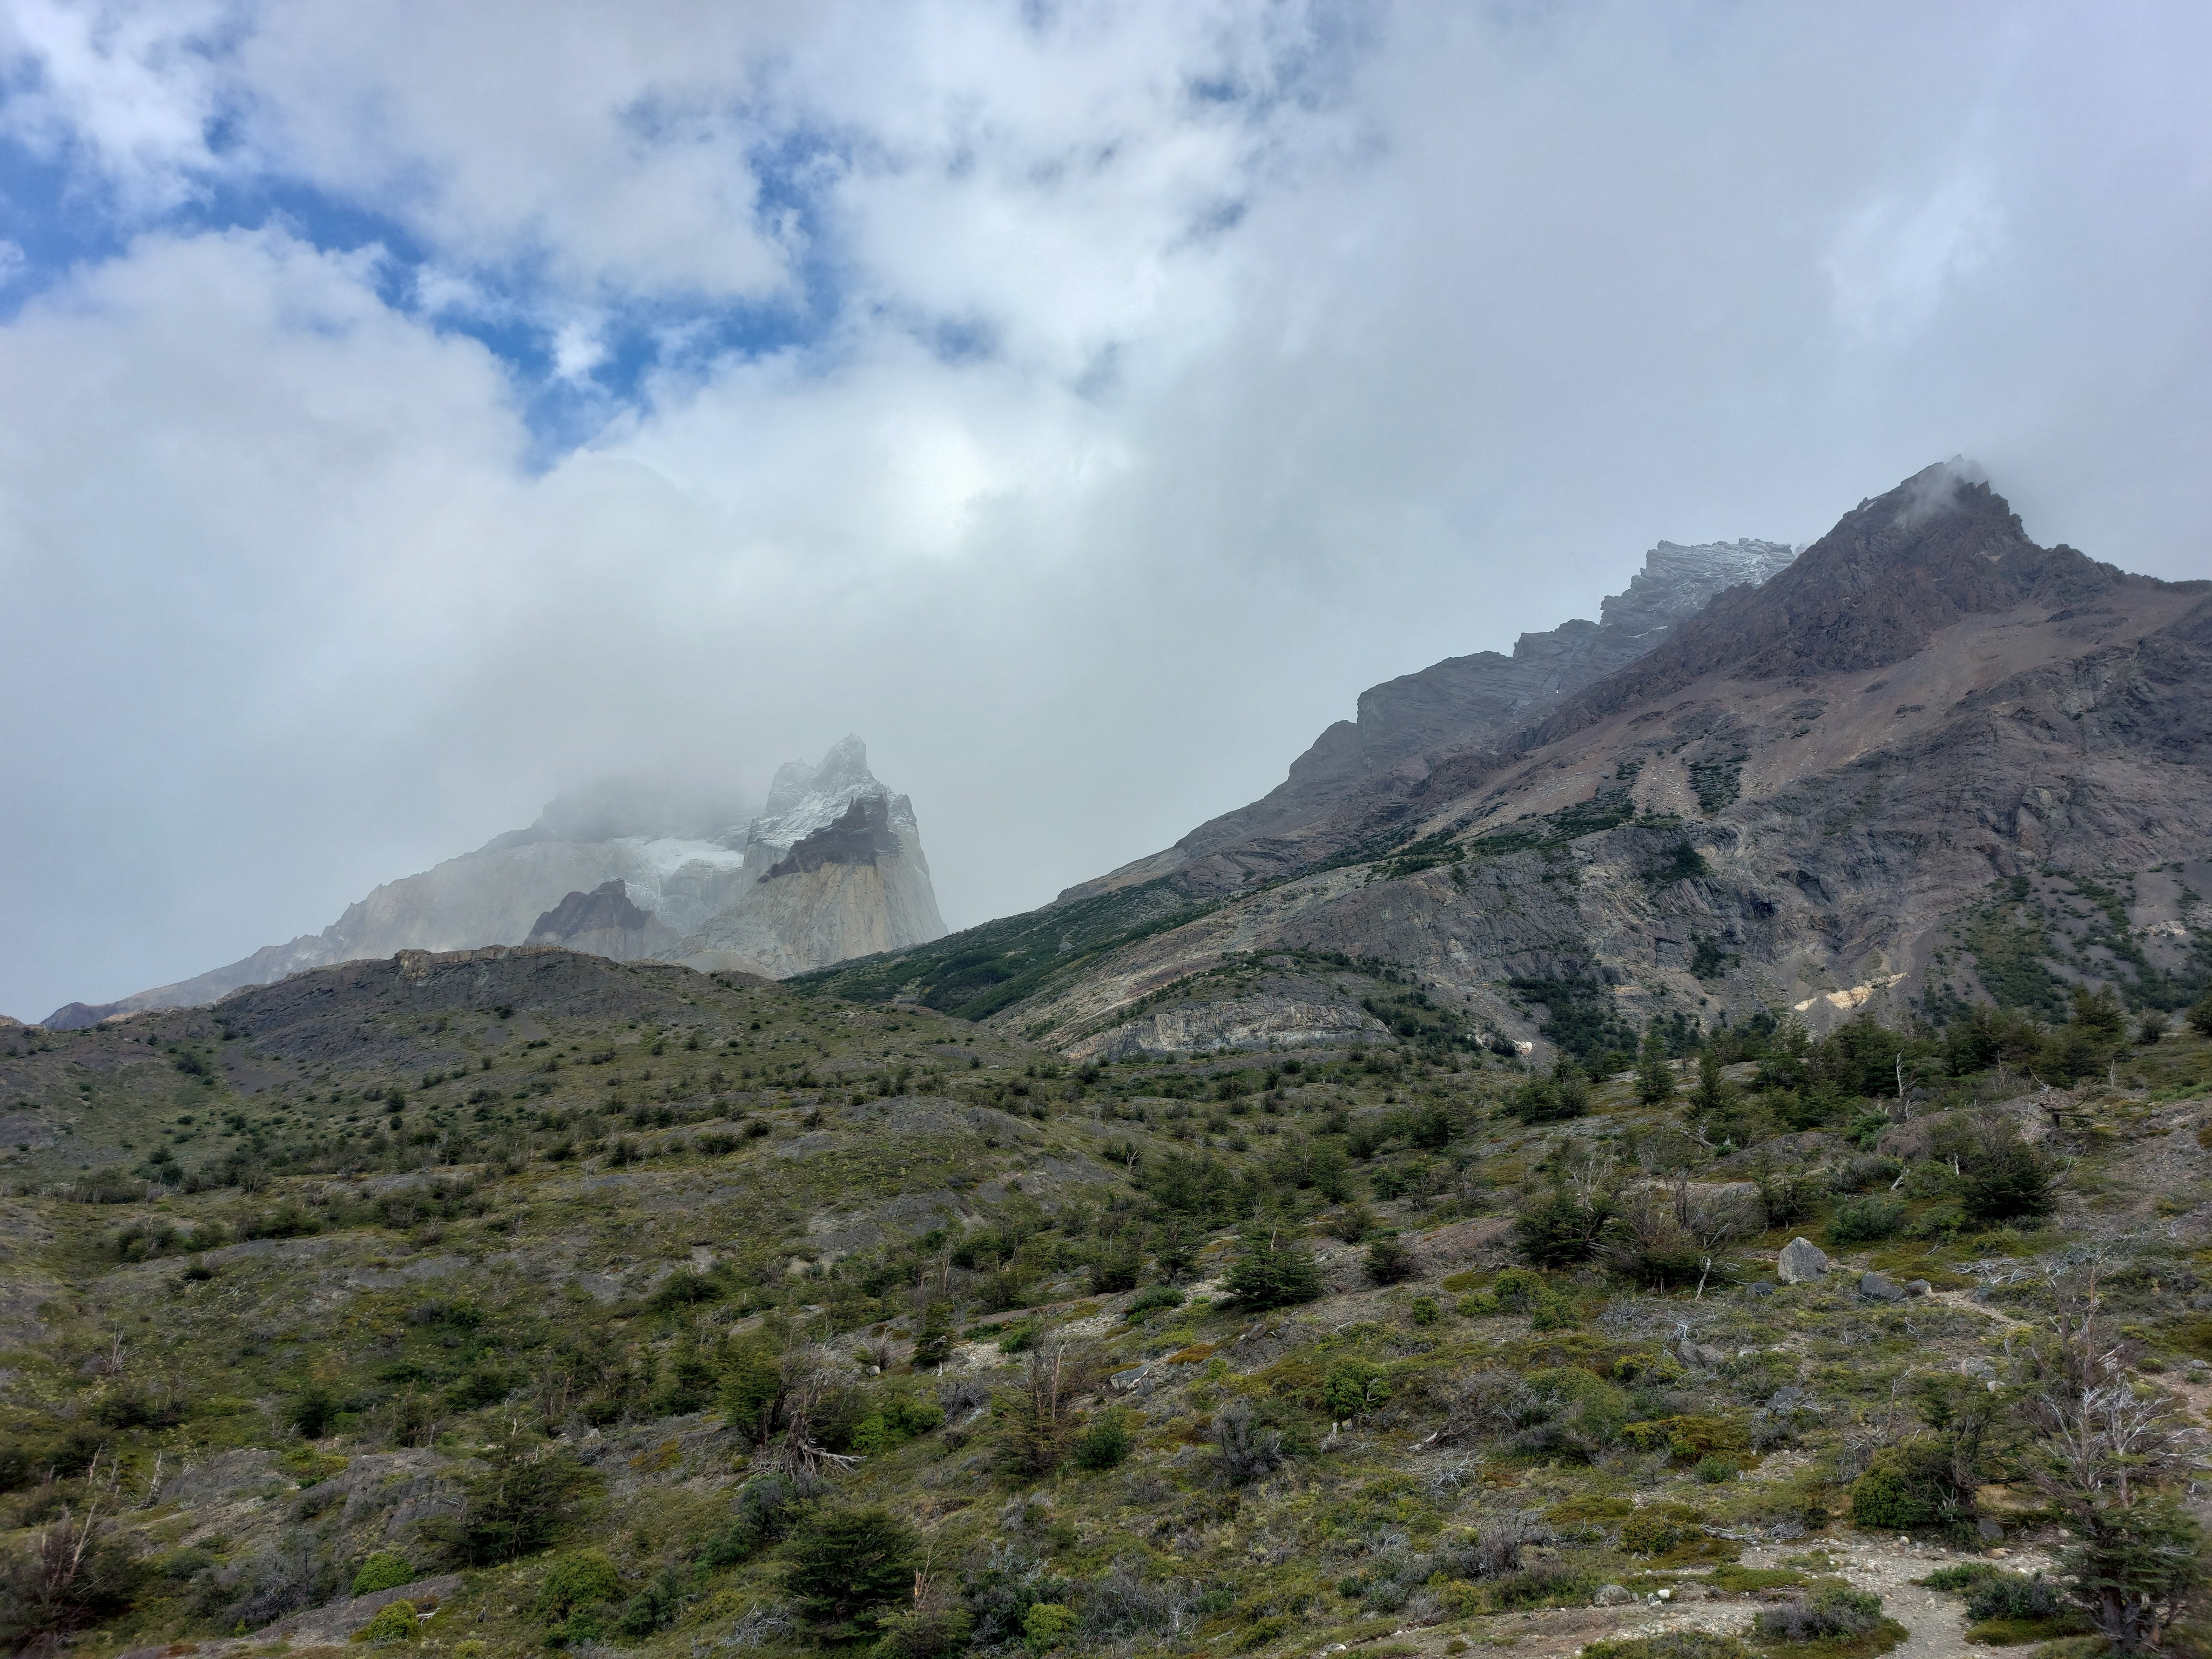 Los Cuernos from further east